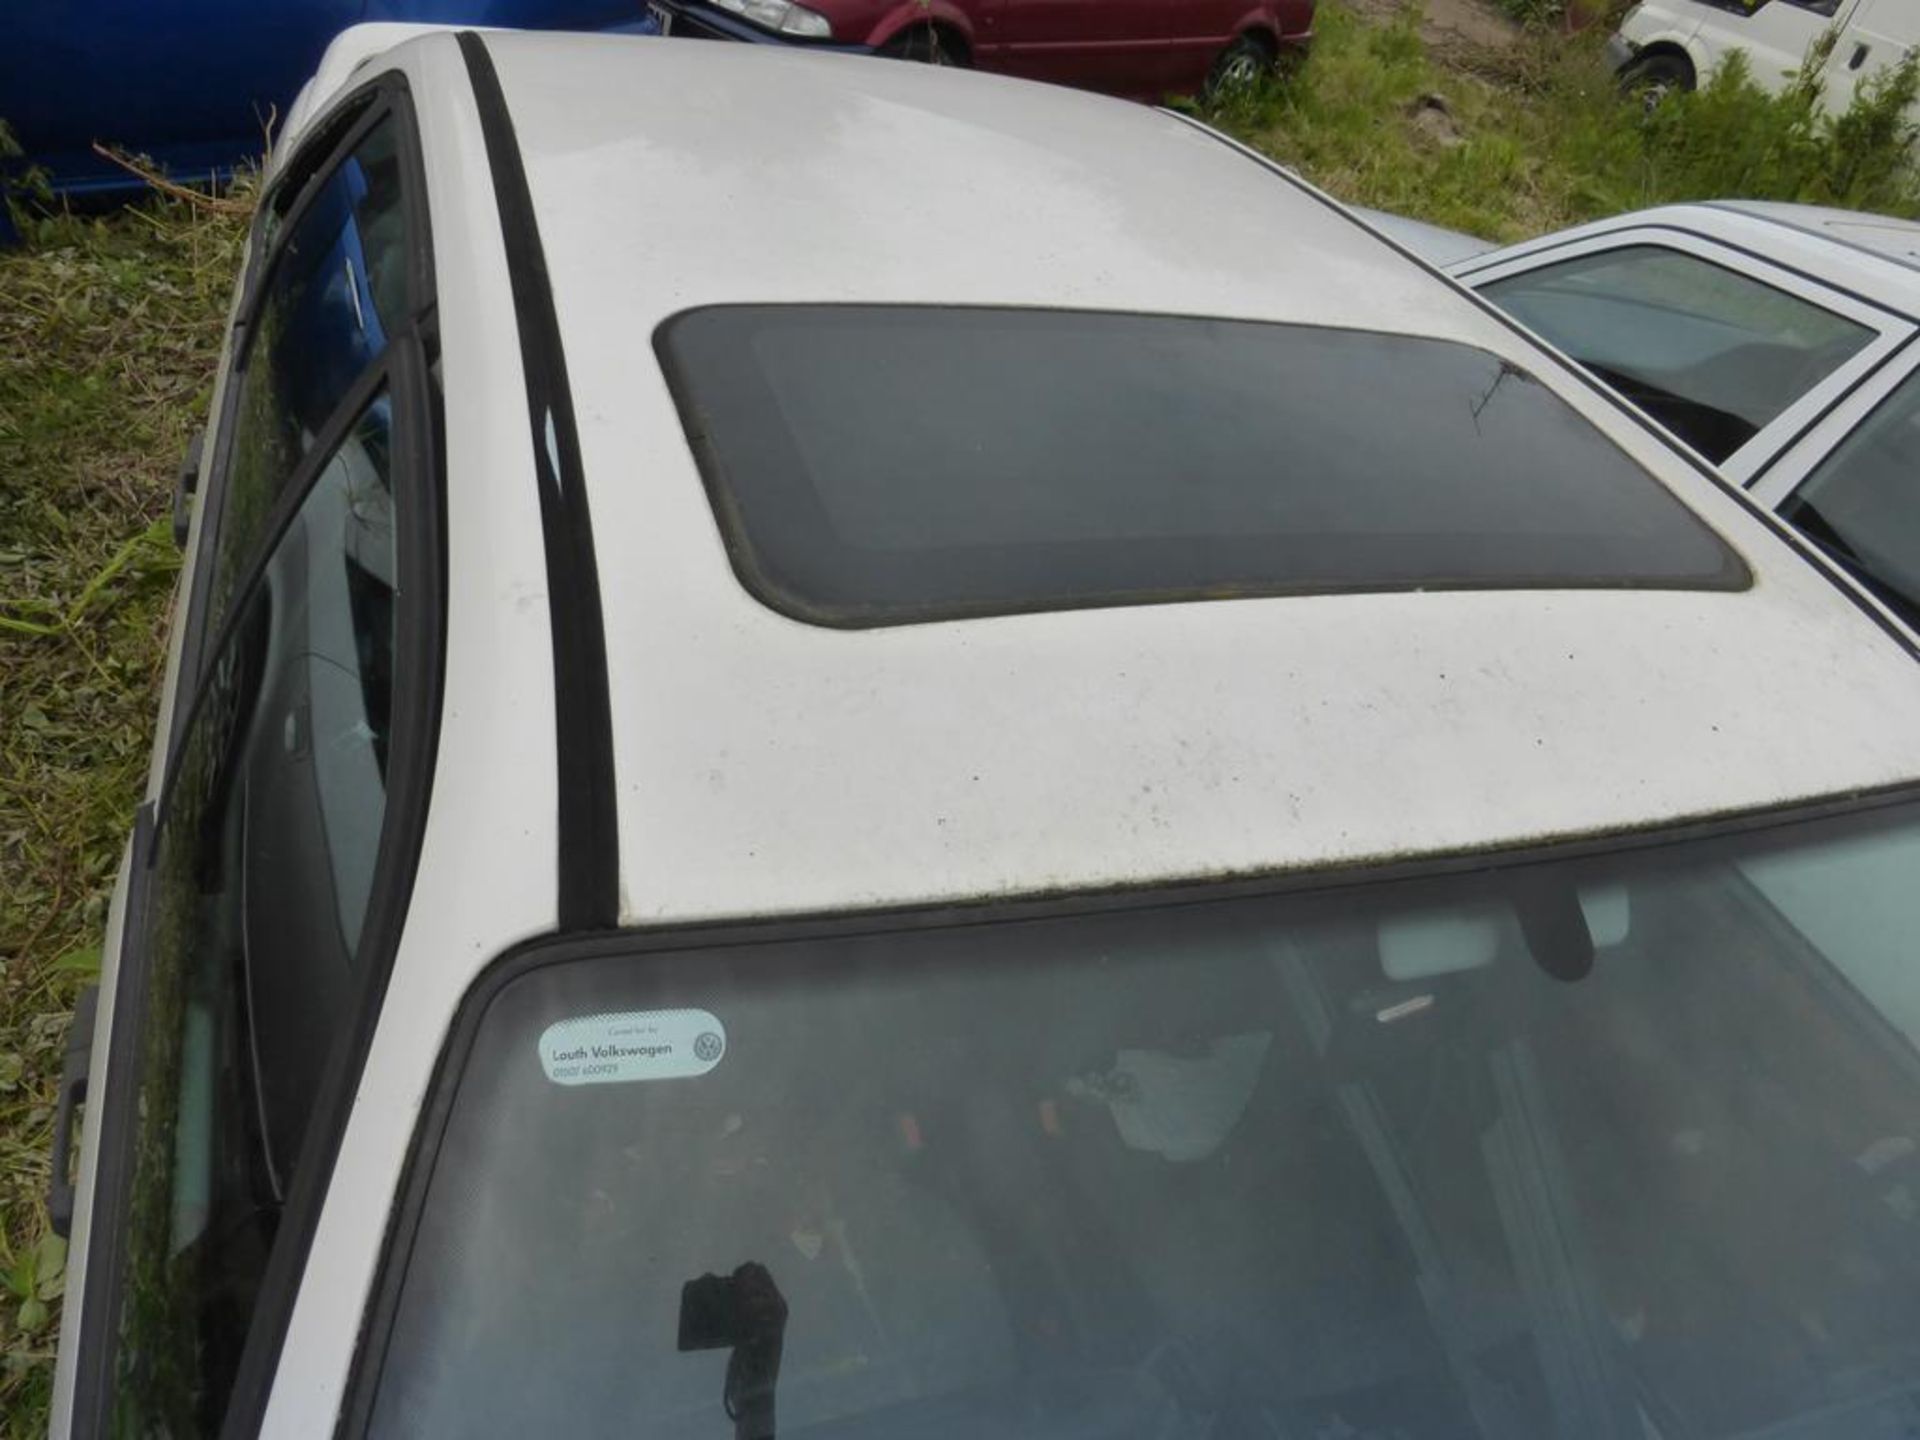 A VW Passat CL Automatic (needs work or good for spares) - Image 9 of 9